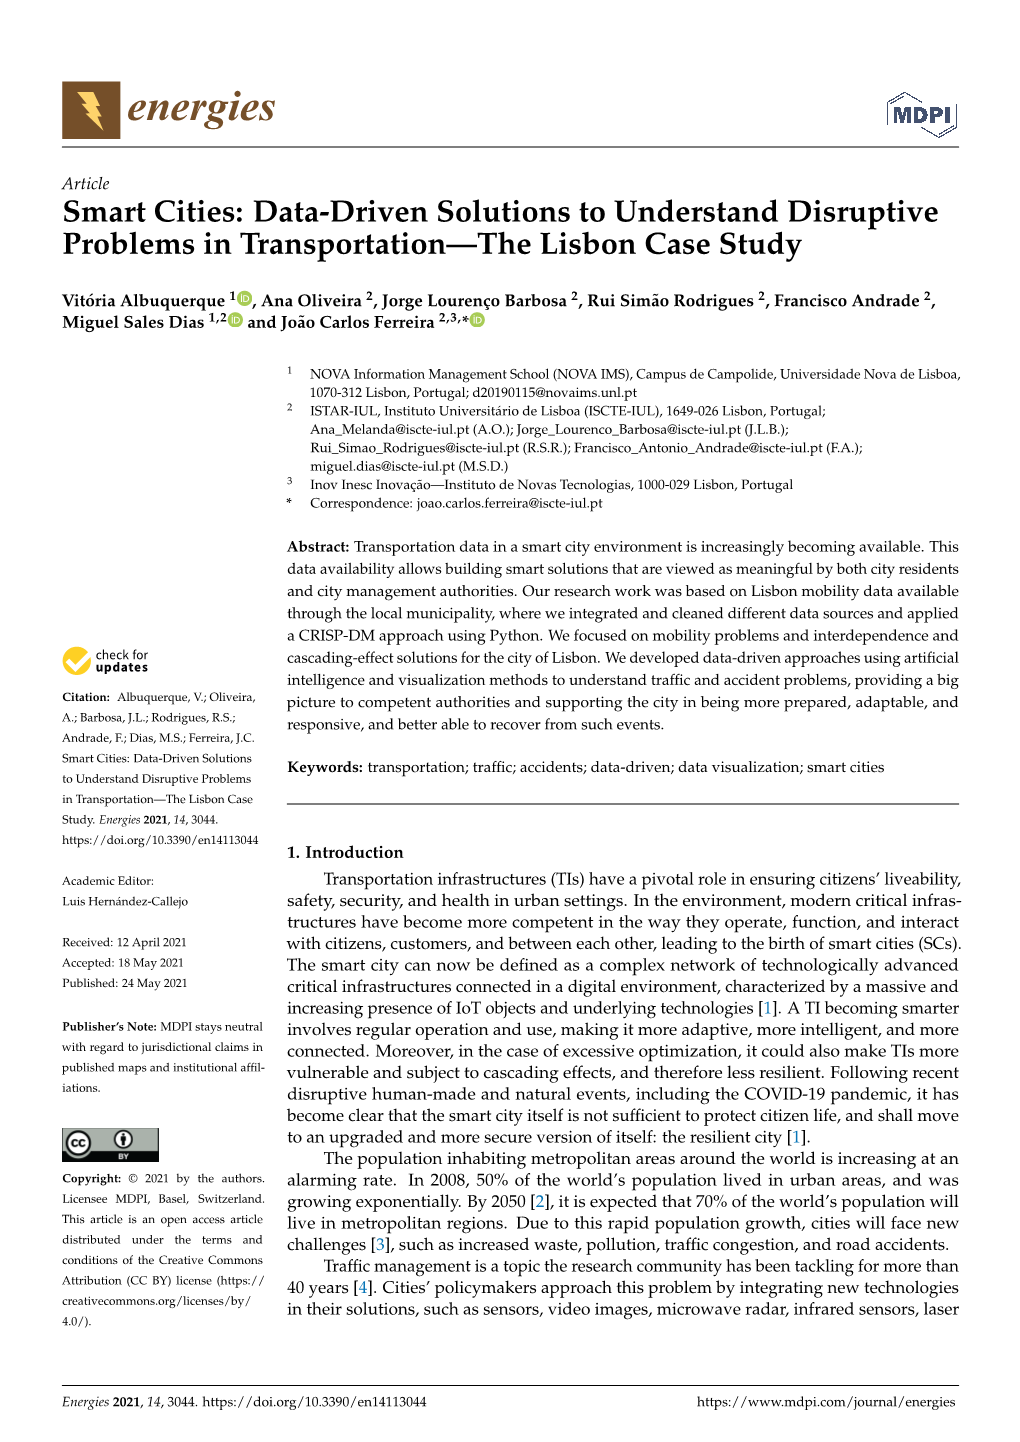 Smart Cities: Data-Driven Solutions to Understand Disruptive Problems in Transportation—The Lisbon Case Study